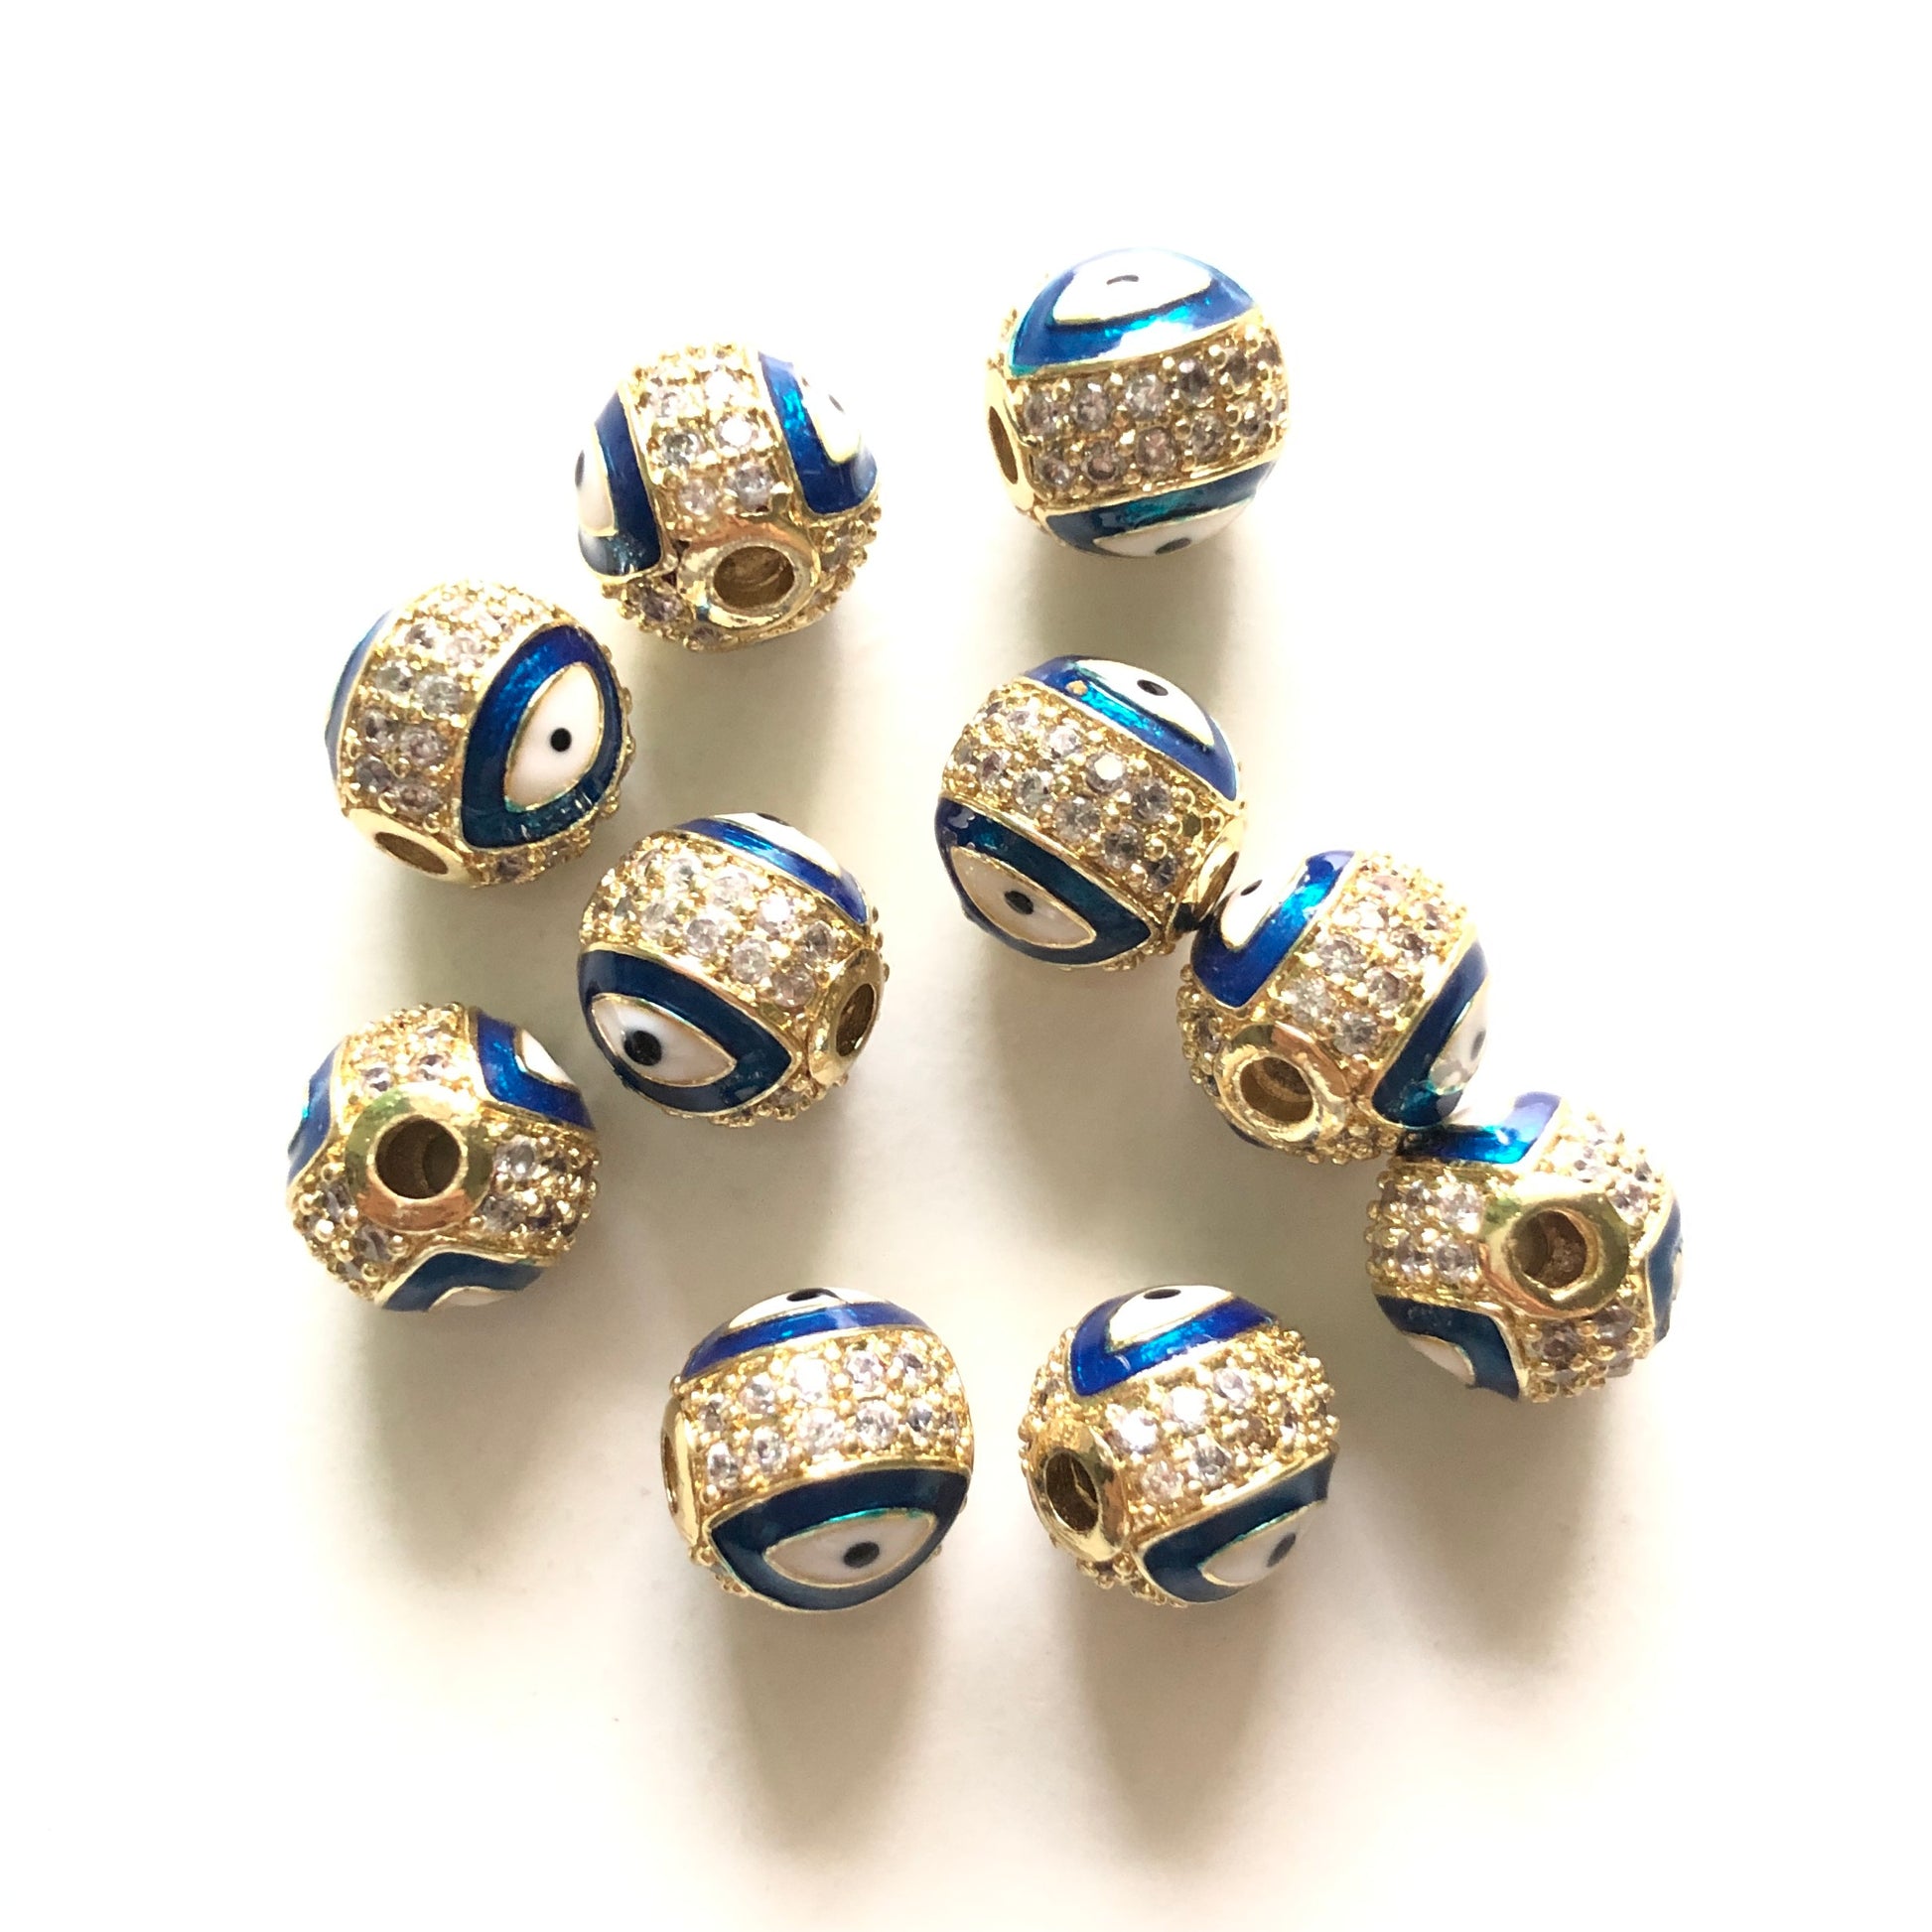 10pcs/lot 10mm CZ Paved Gold Evil Eye Ball Spacers Beads Blue CZ Paved Spacers 10mm Beads Ball Beads New Spacers Arrivals Charms Beads Beyond